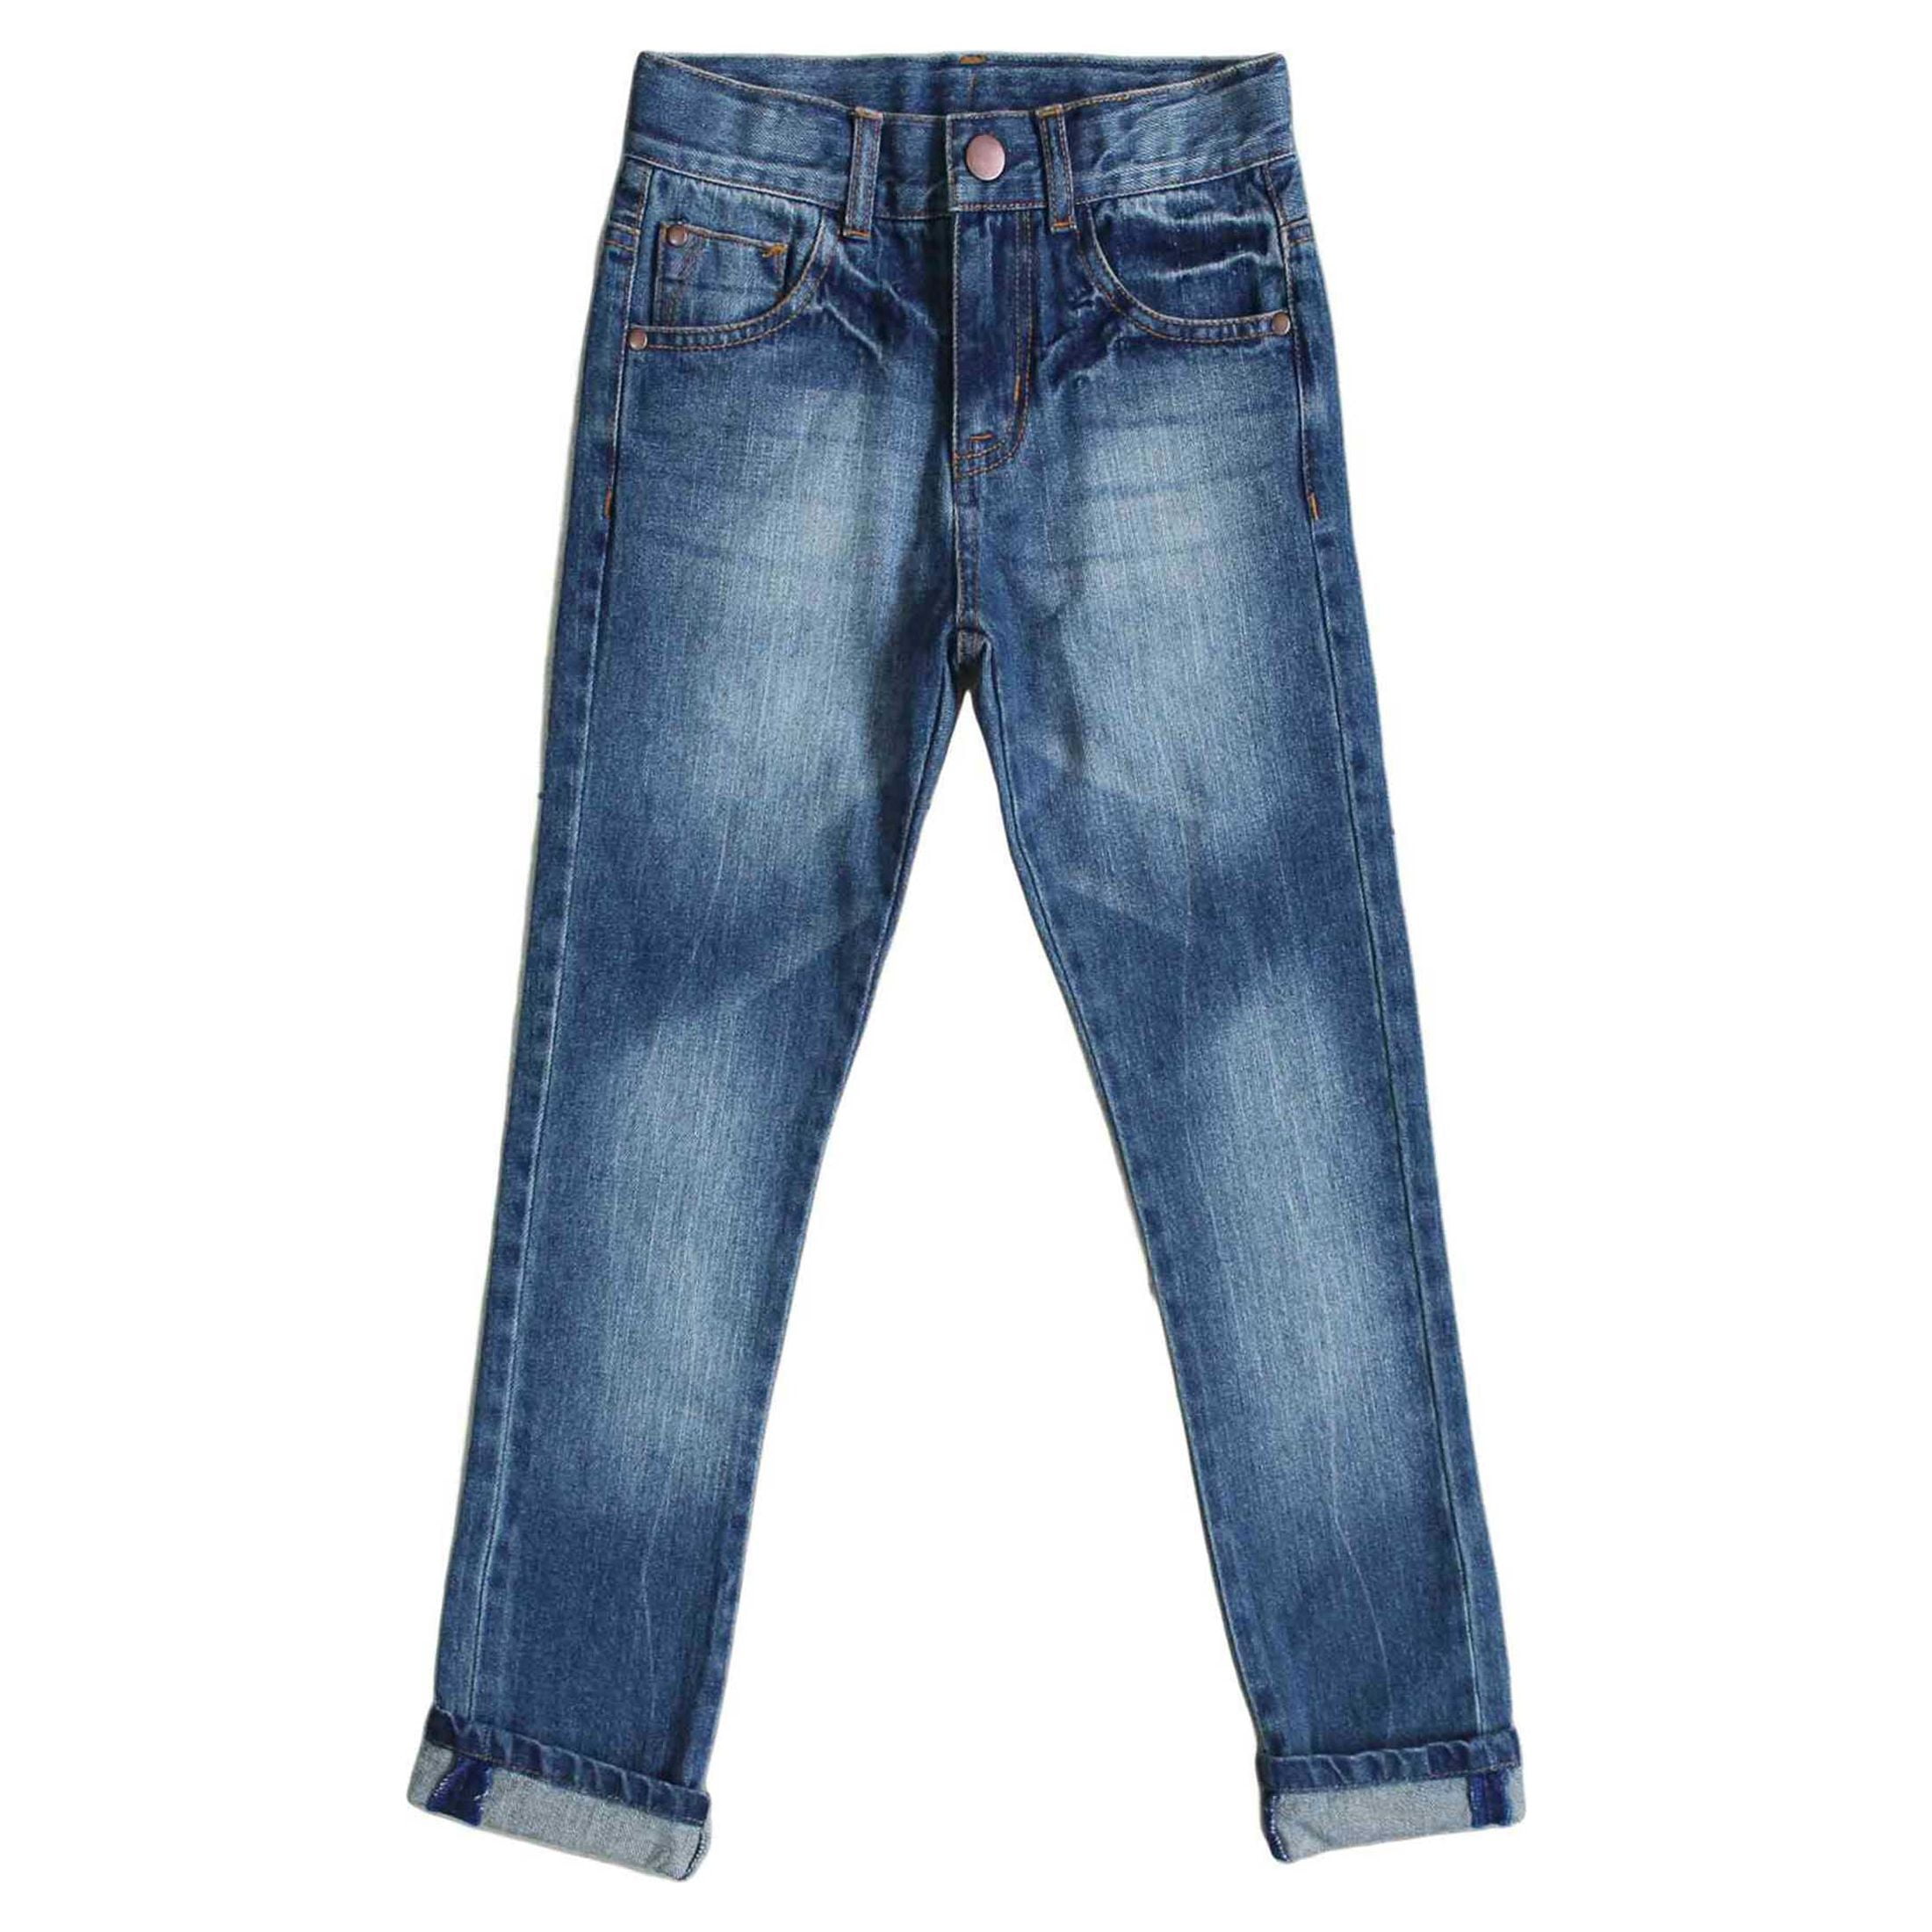 Buy Boys Jeans MidWash RibWaist Jeans -Denim Online at Best Price |  Mothercare